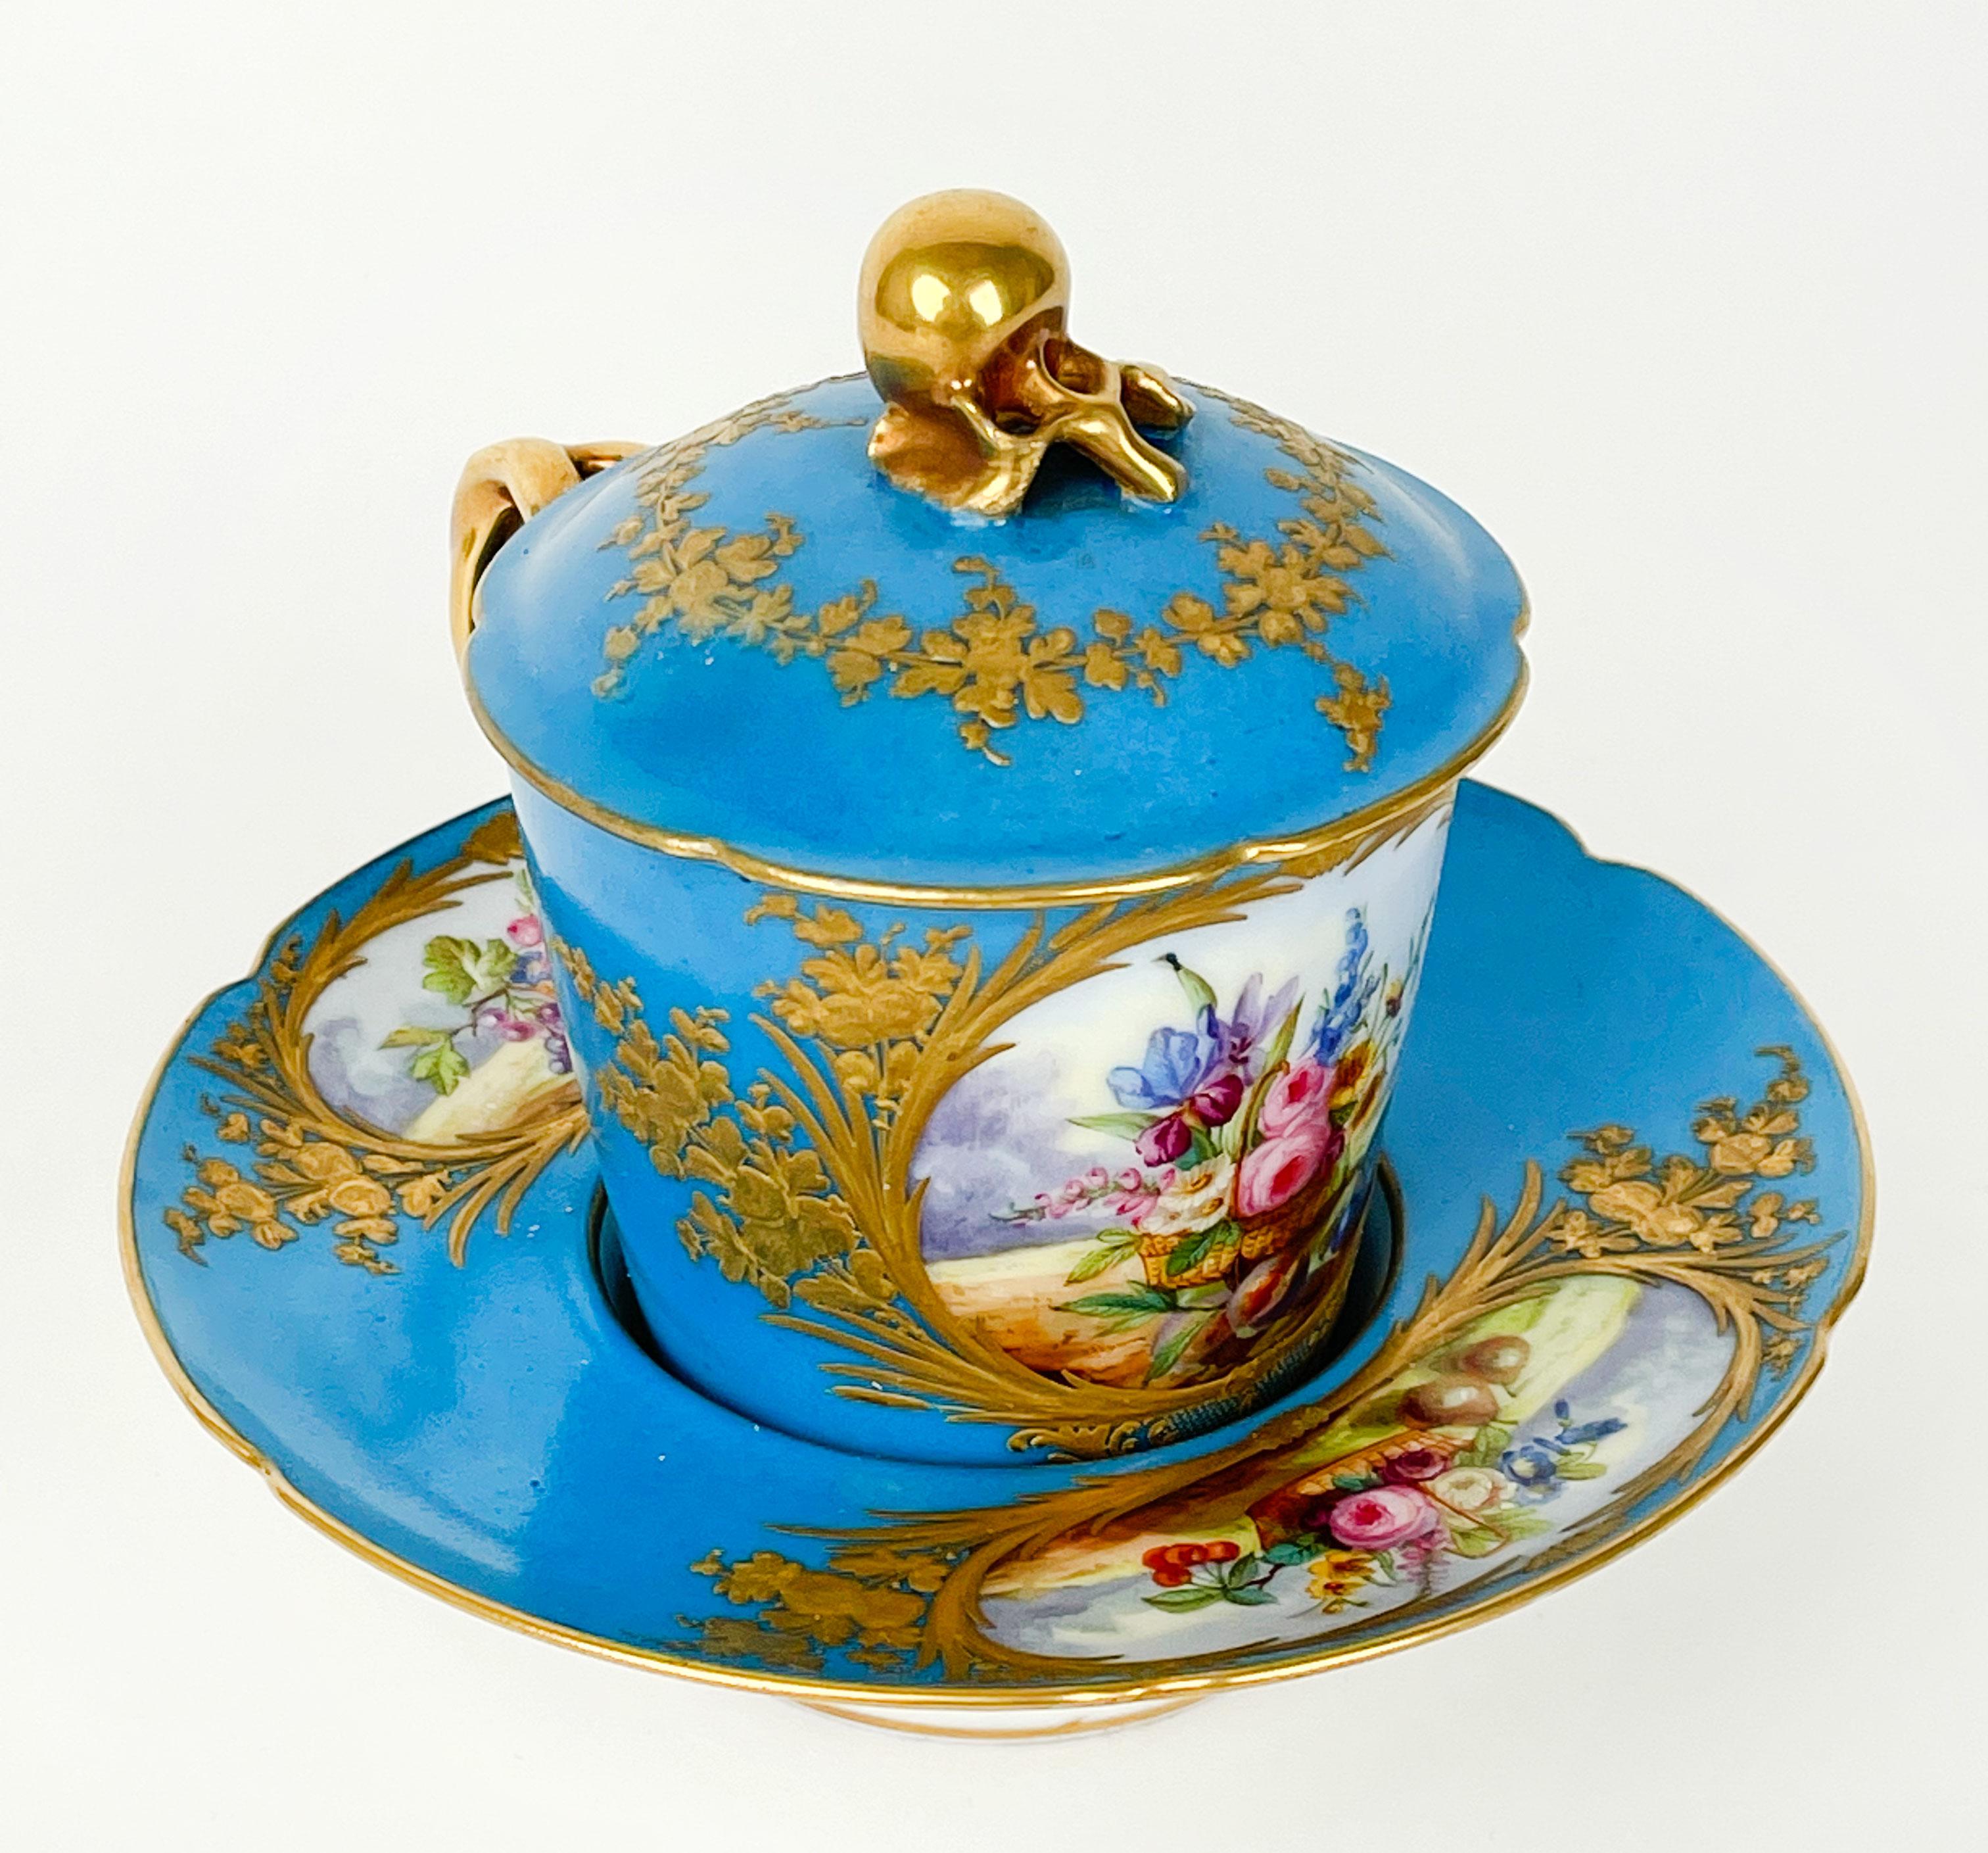 18th Century French sevres porcelain cup & saucer.


The Manufacture nationale de Sèvres is one of the principal European porcelain factories. It is located in Sèvres, Hauts-de-Seine, France. It is the continuation of Vincennes porcelain, founded